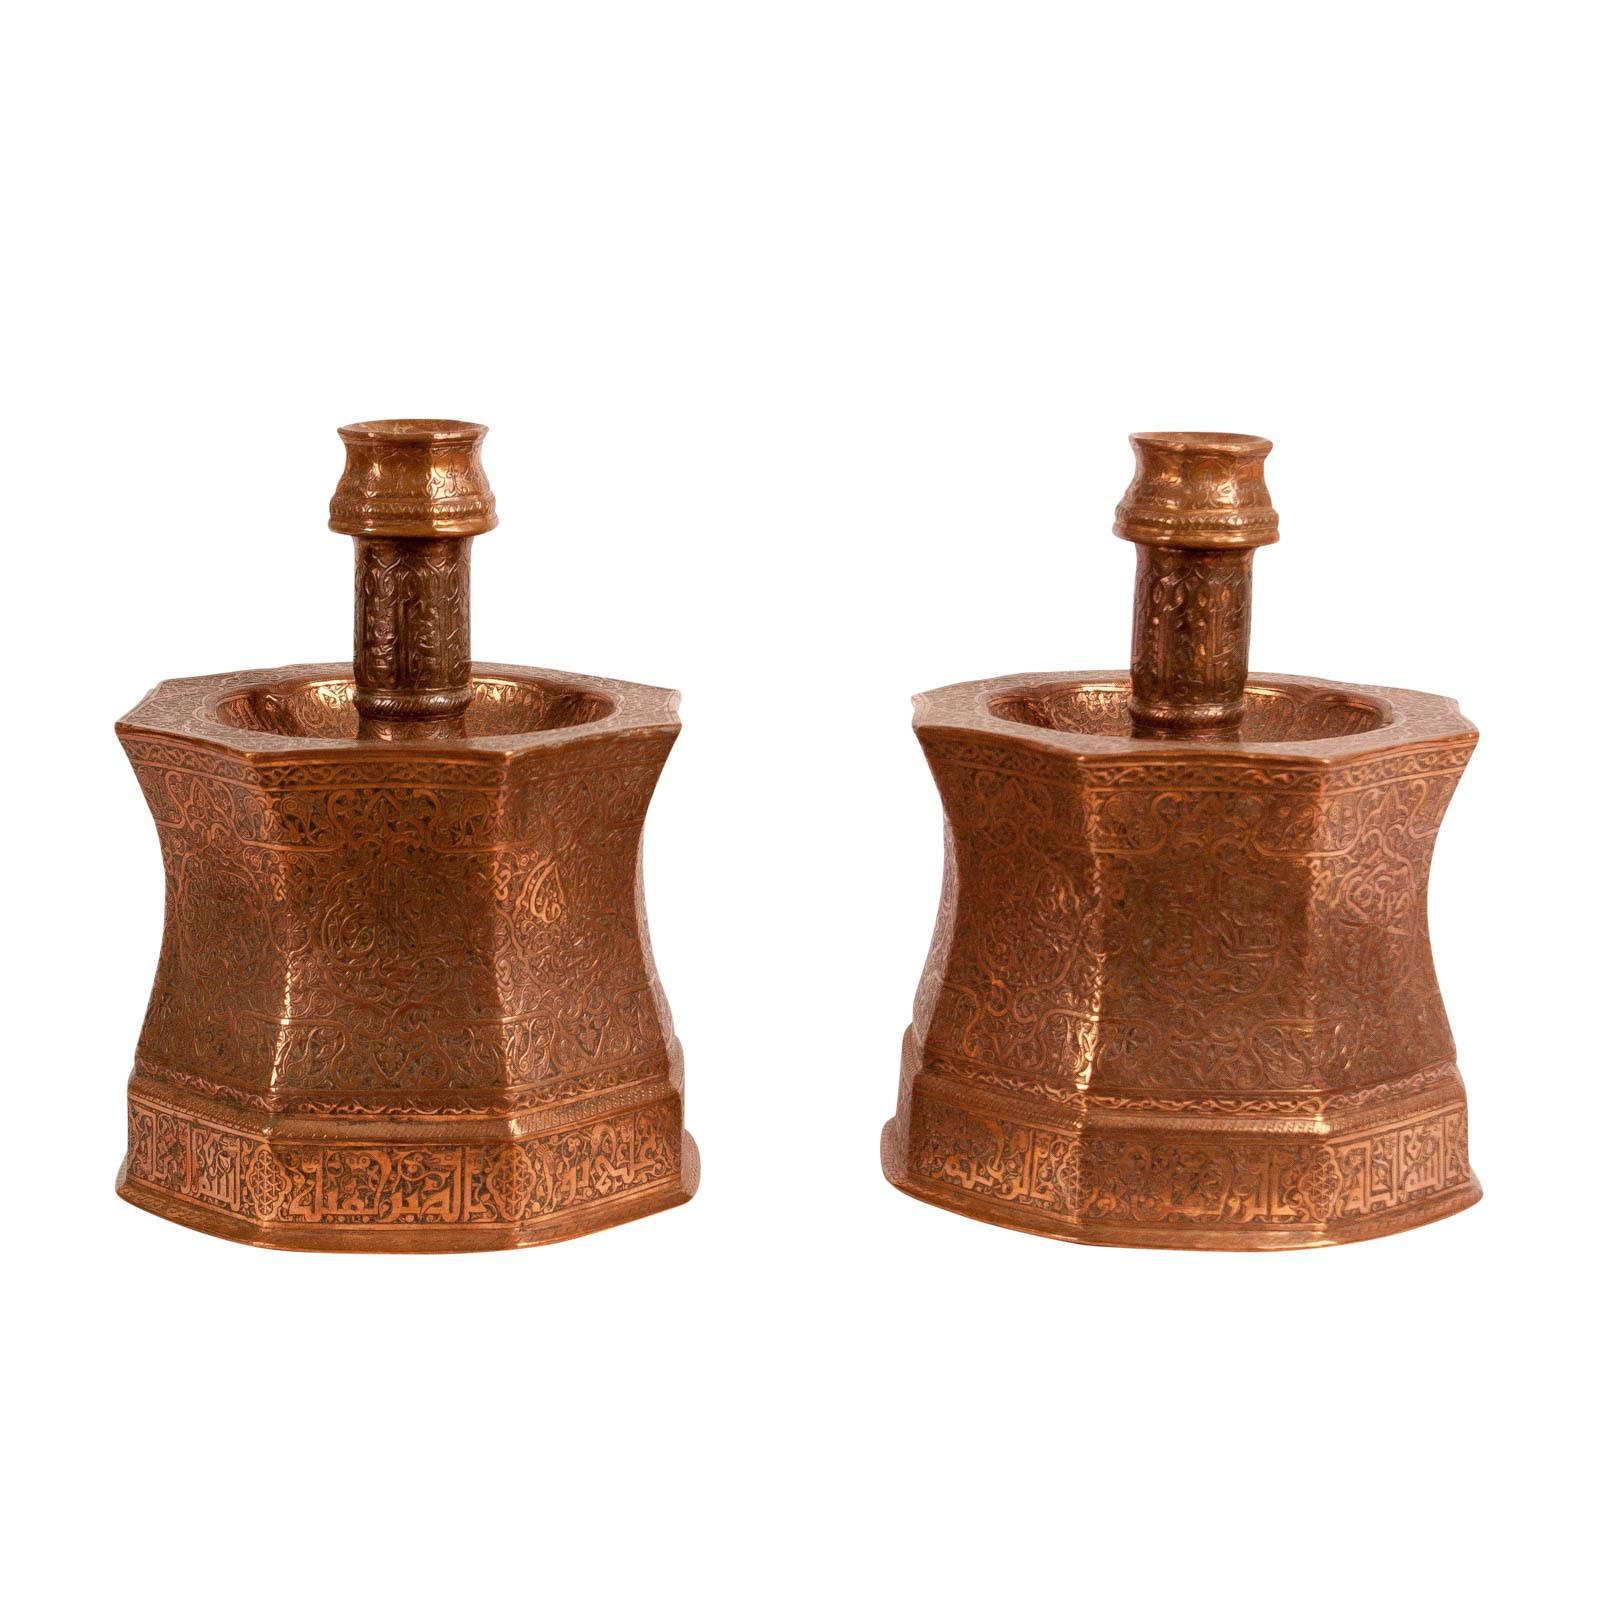 Large Pair of Ottoman Engraved Copper Candlesticks, circa 1830